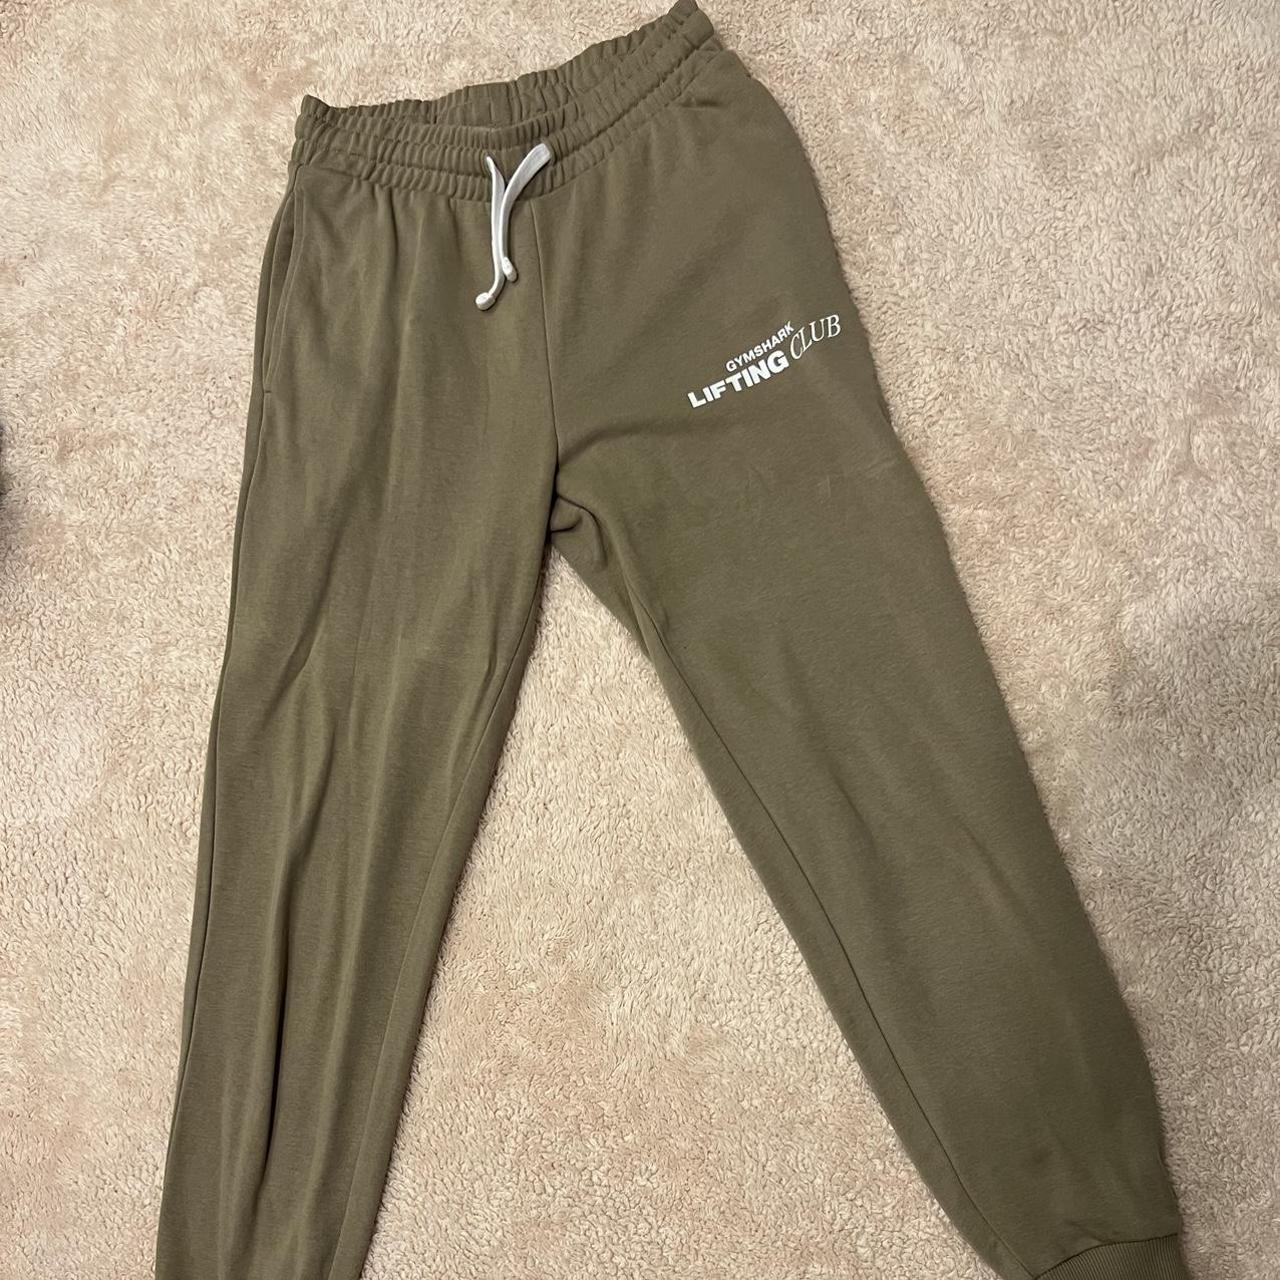 Gymshark joggers. Gently used in good condition. - Depop